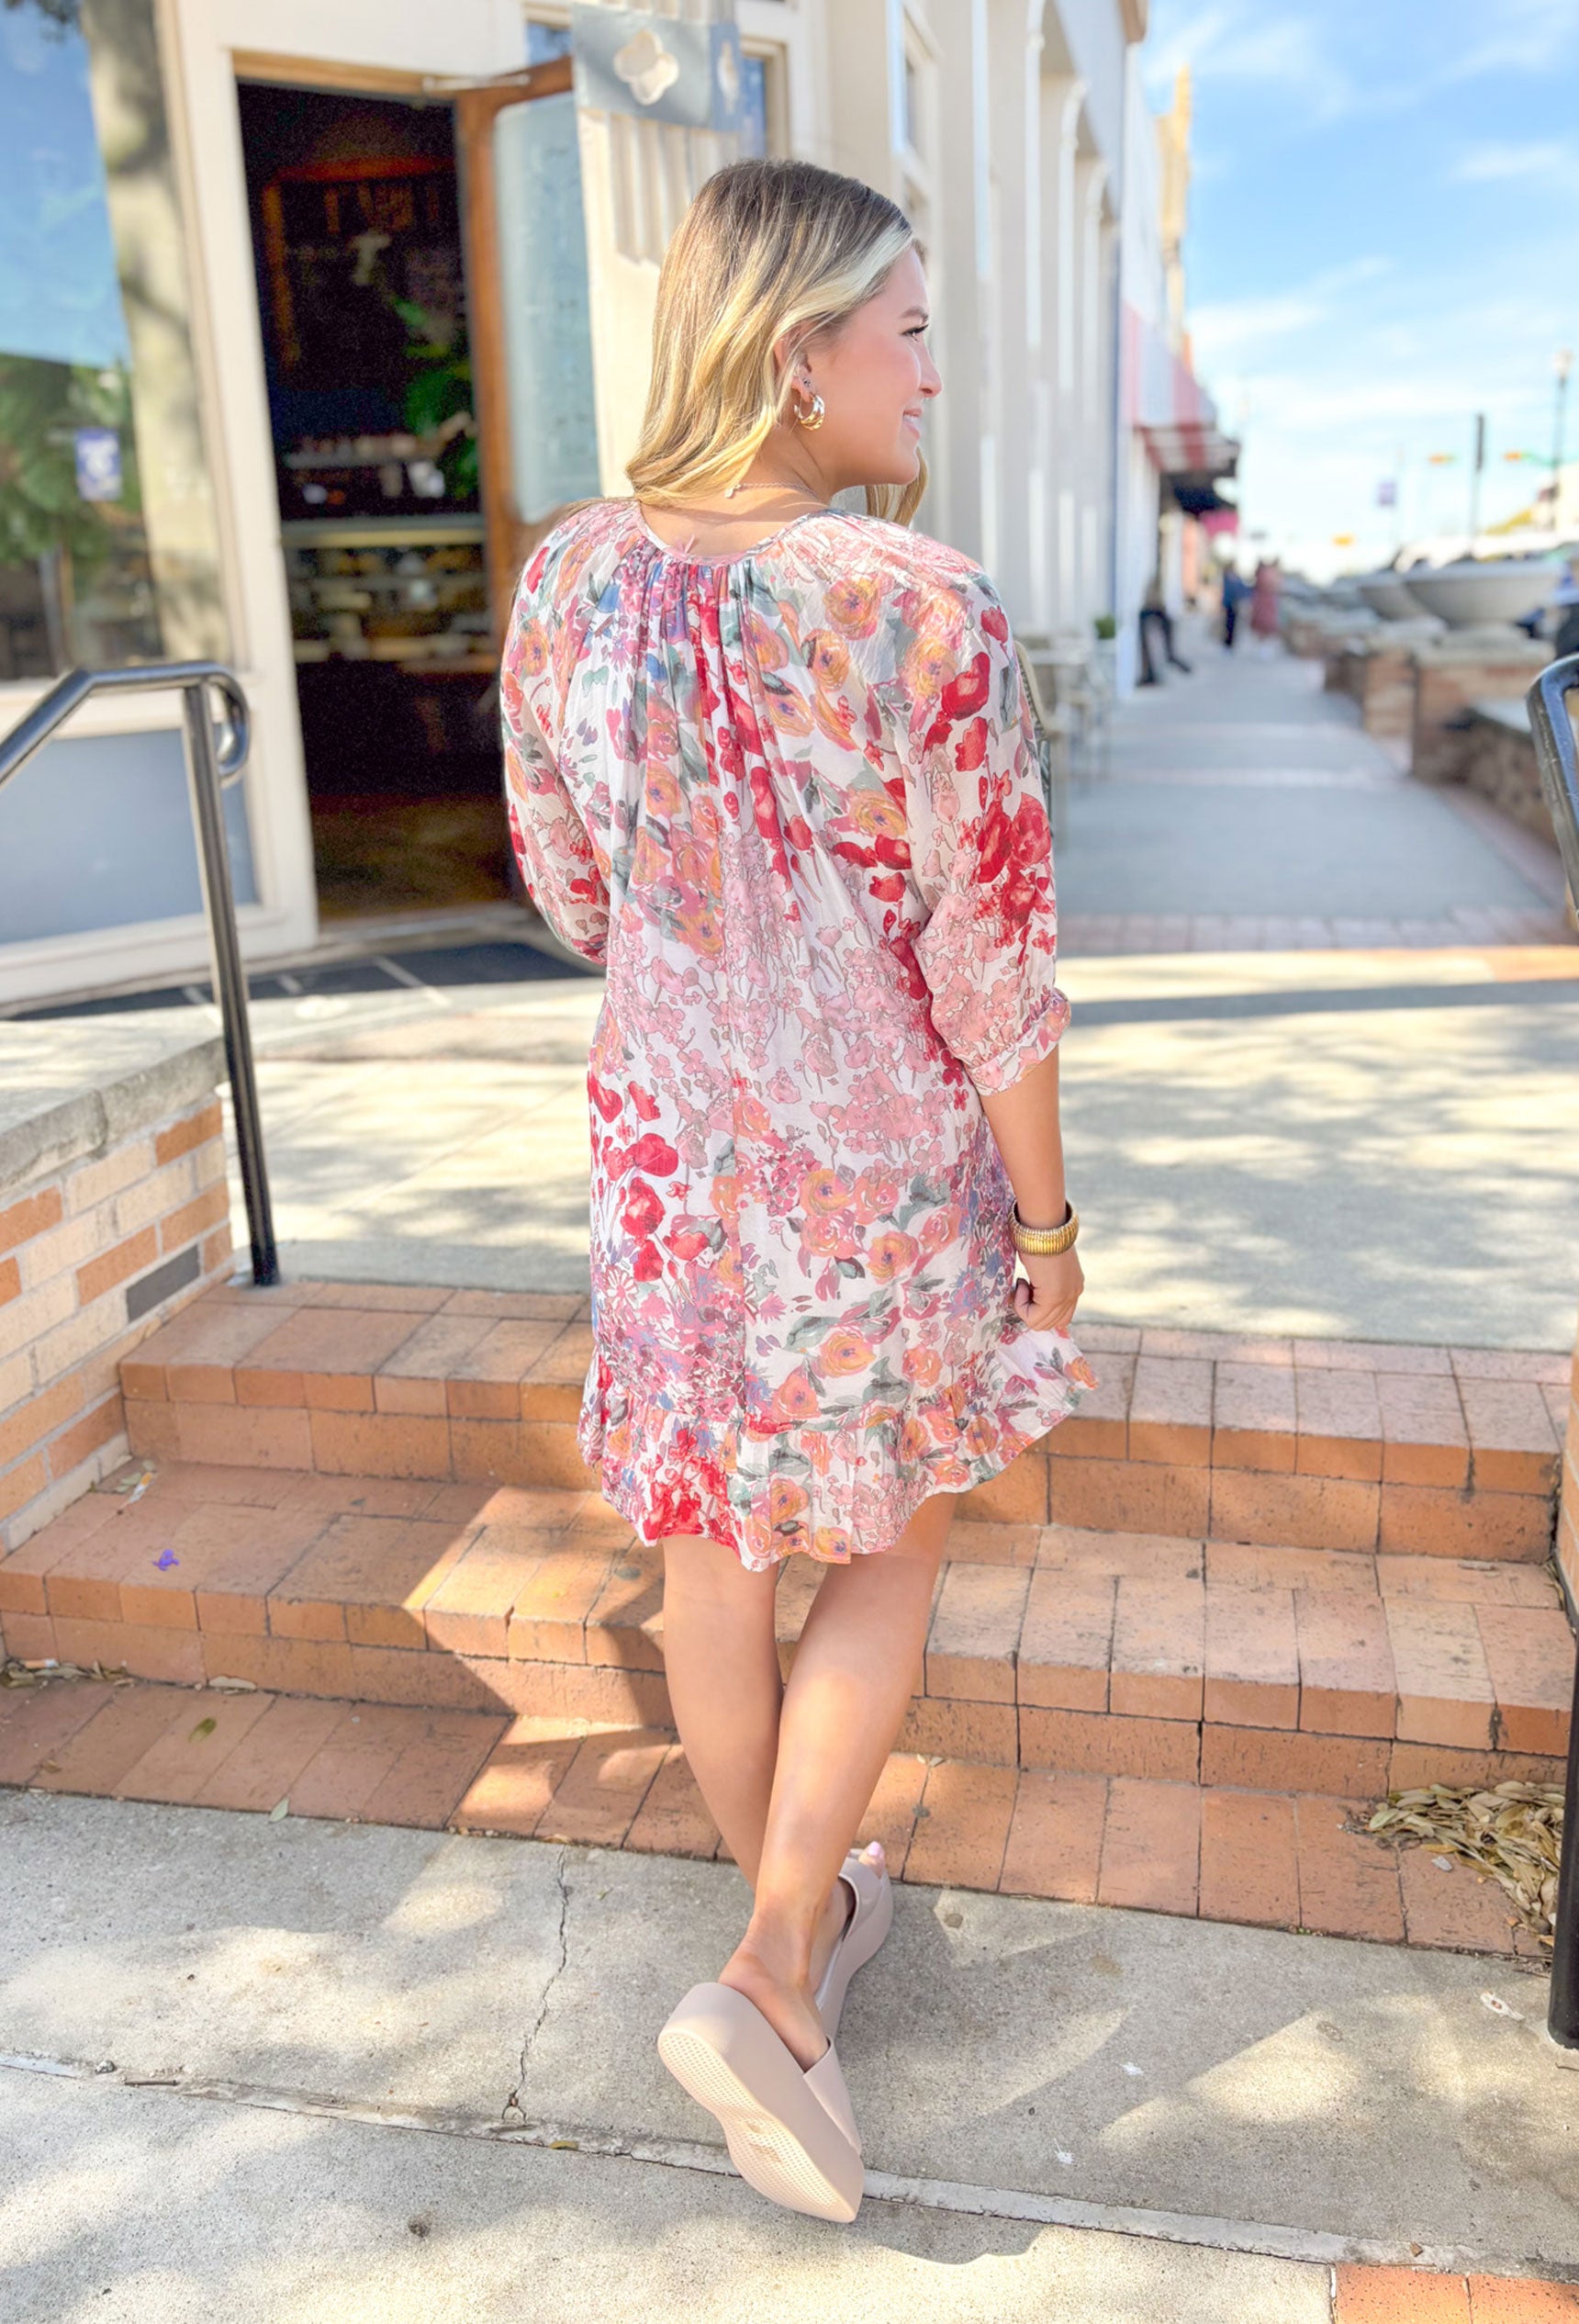 Sweetest Secret Floral Dress, short sleeve drawstring waist band dress in a floral print with the colors, cranberry, cream, rose, light mauve, light blue, and sage